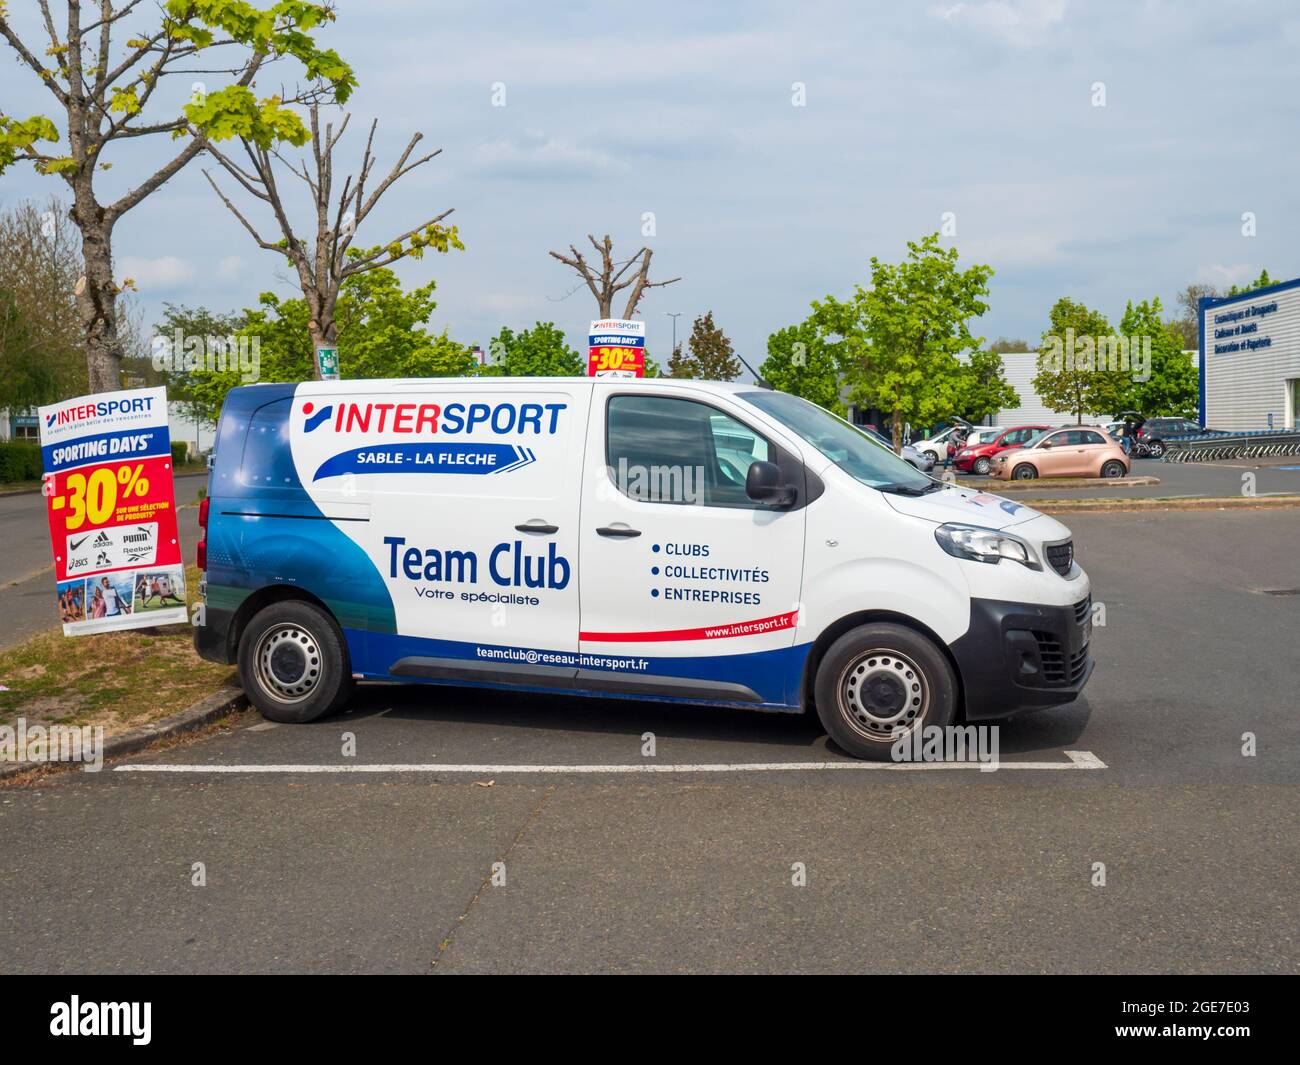 FLEC, FRANCE - Jul 30, 2021: A white van parked in a parking lot with  Intersport and team club text on it Stock Photo - Alamy